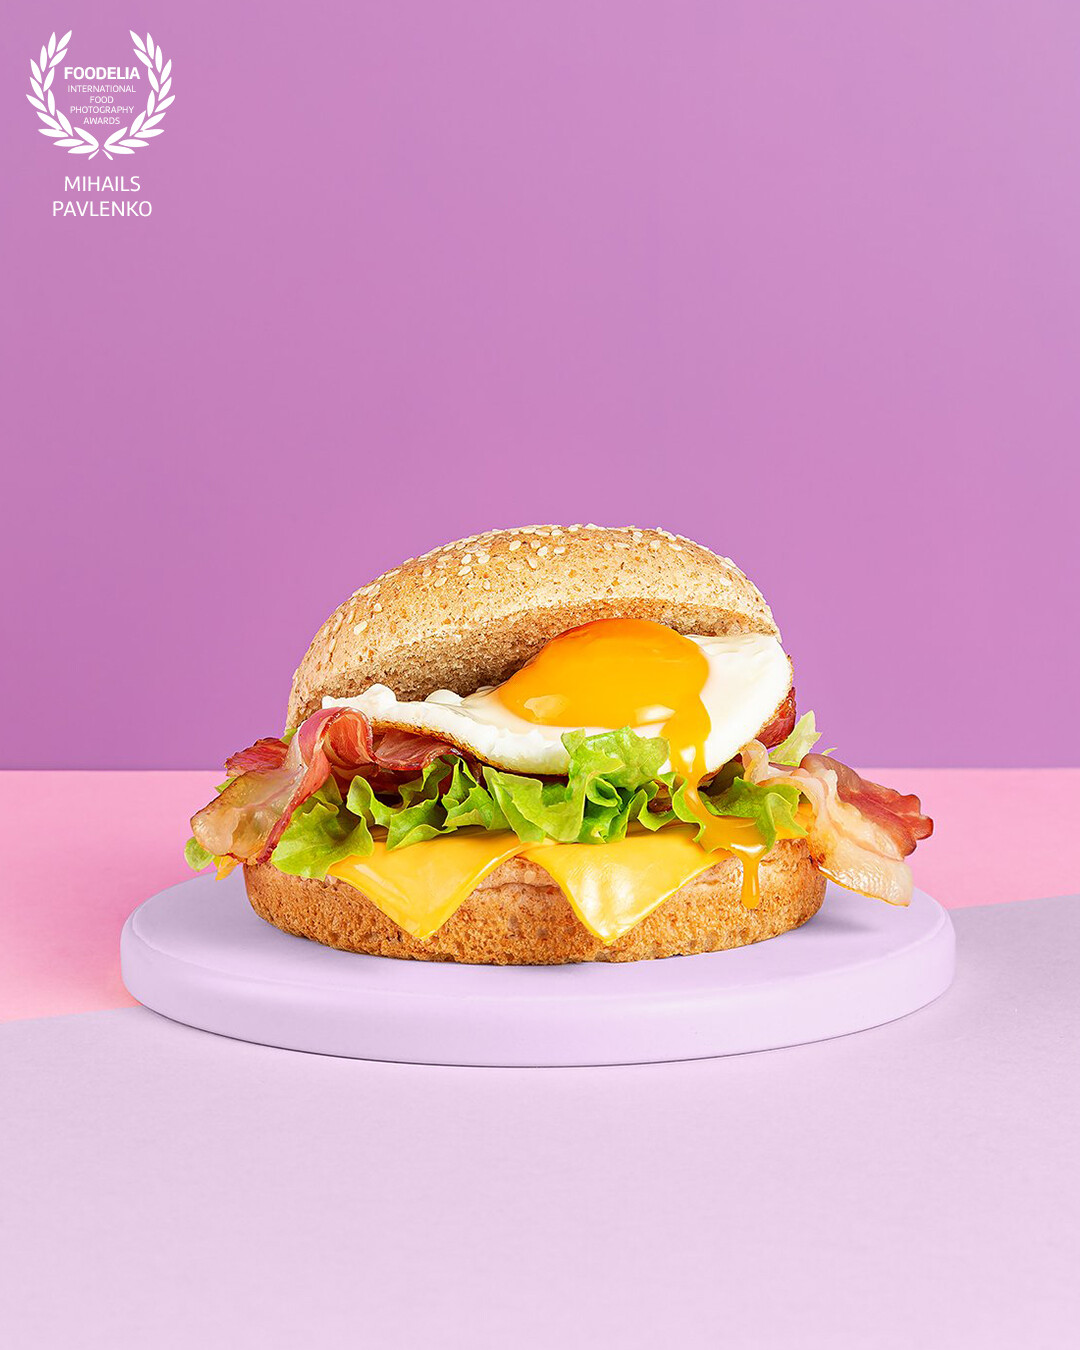 New project of @primoriga agency. Burger with egg.